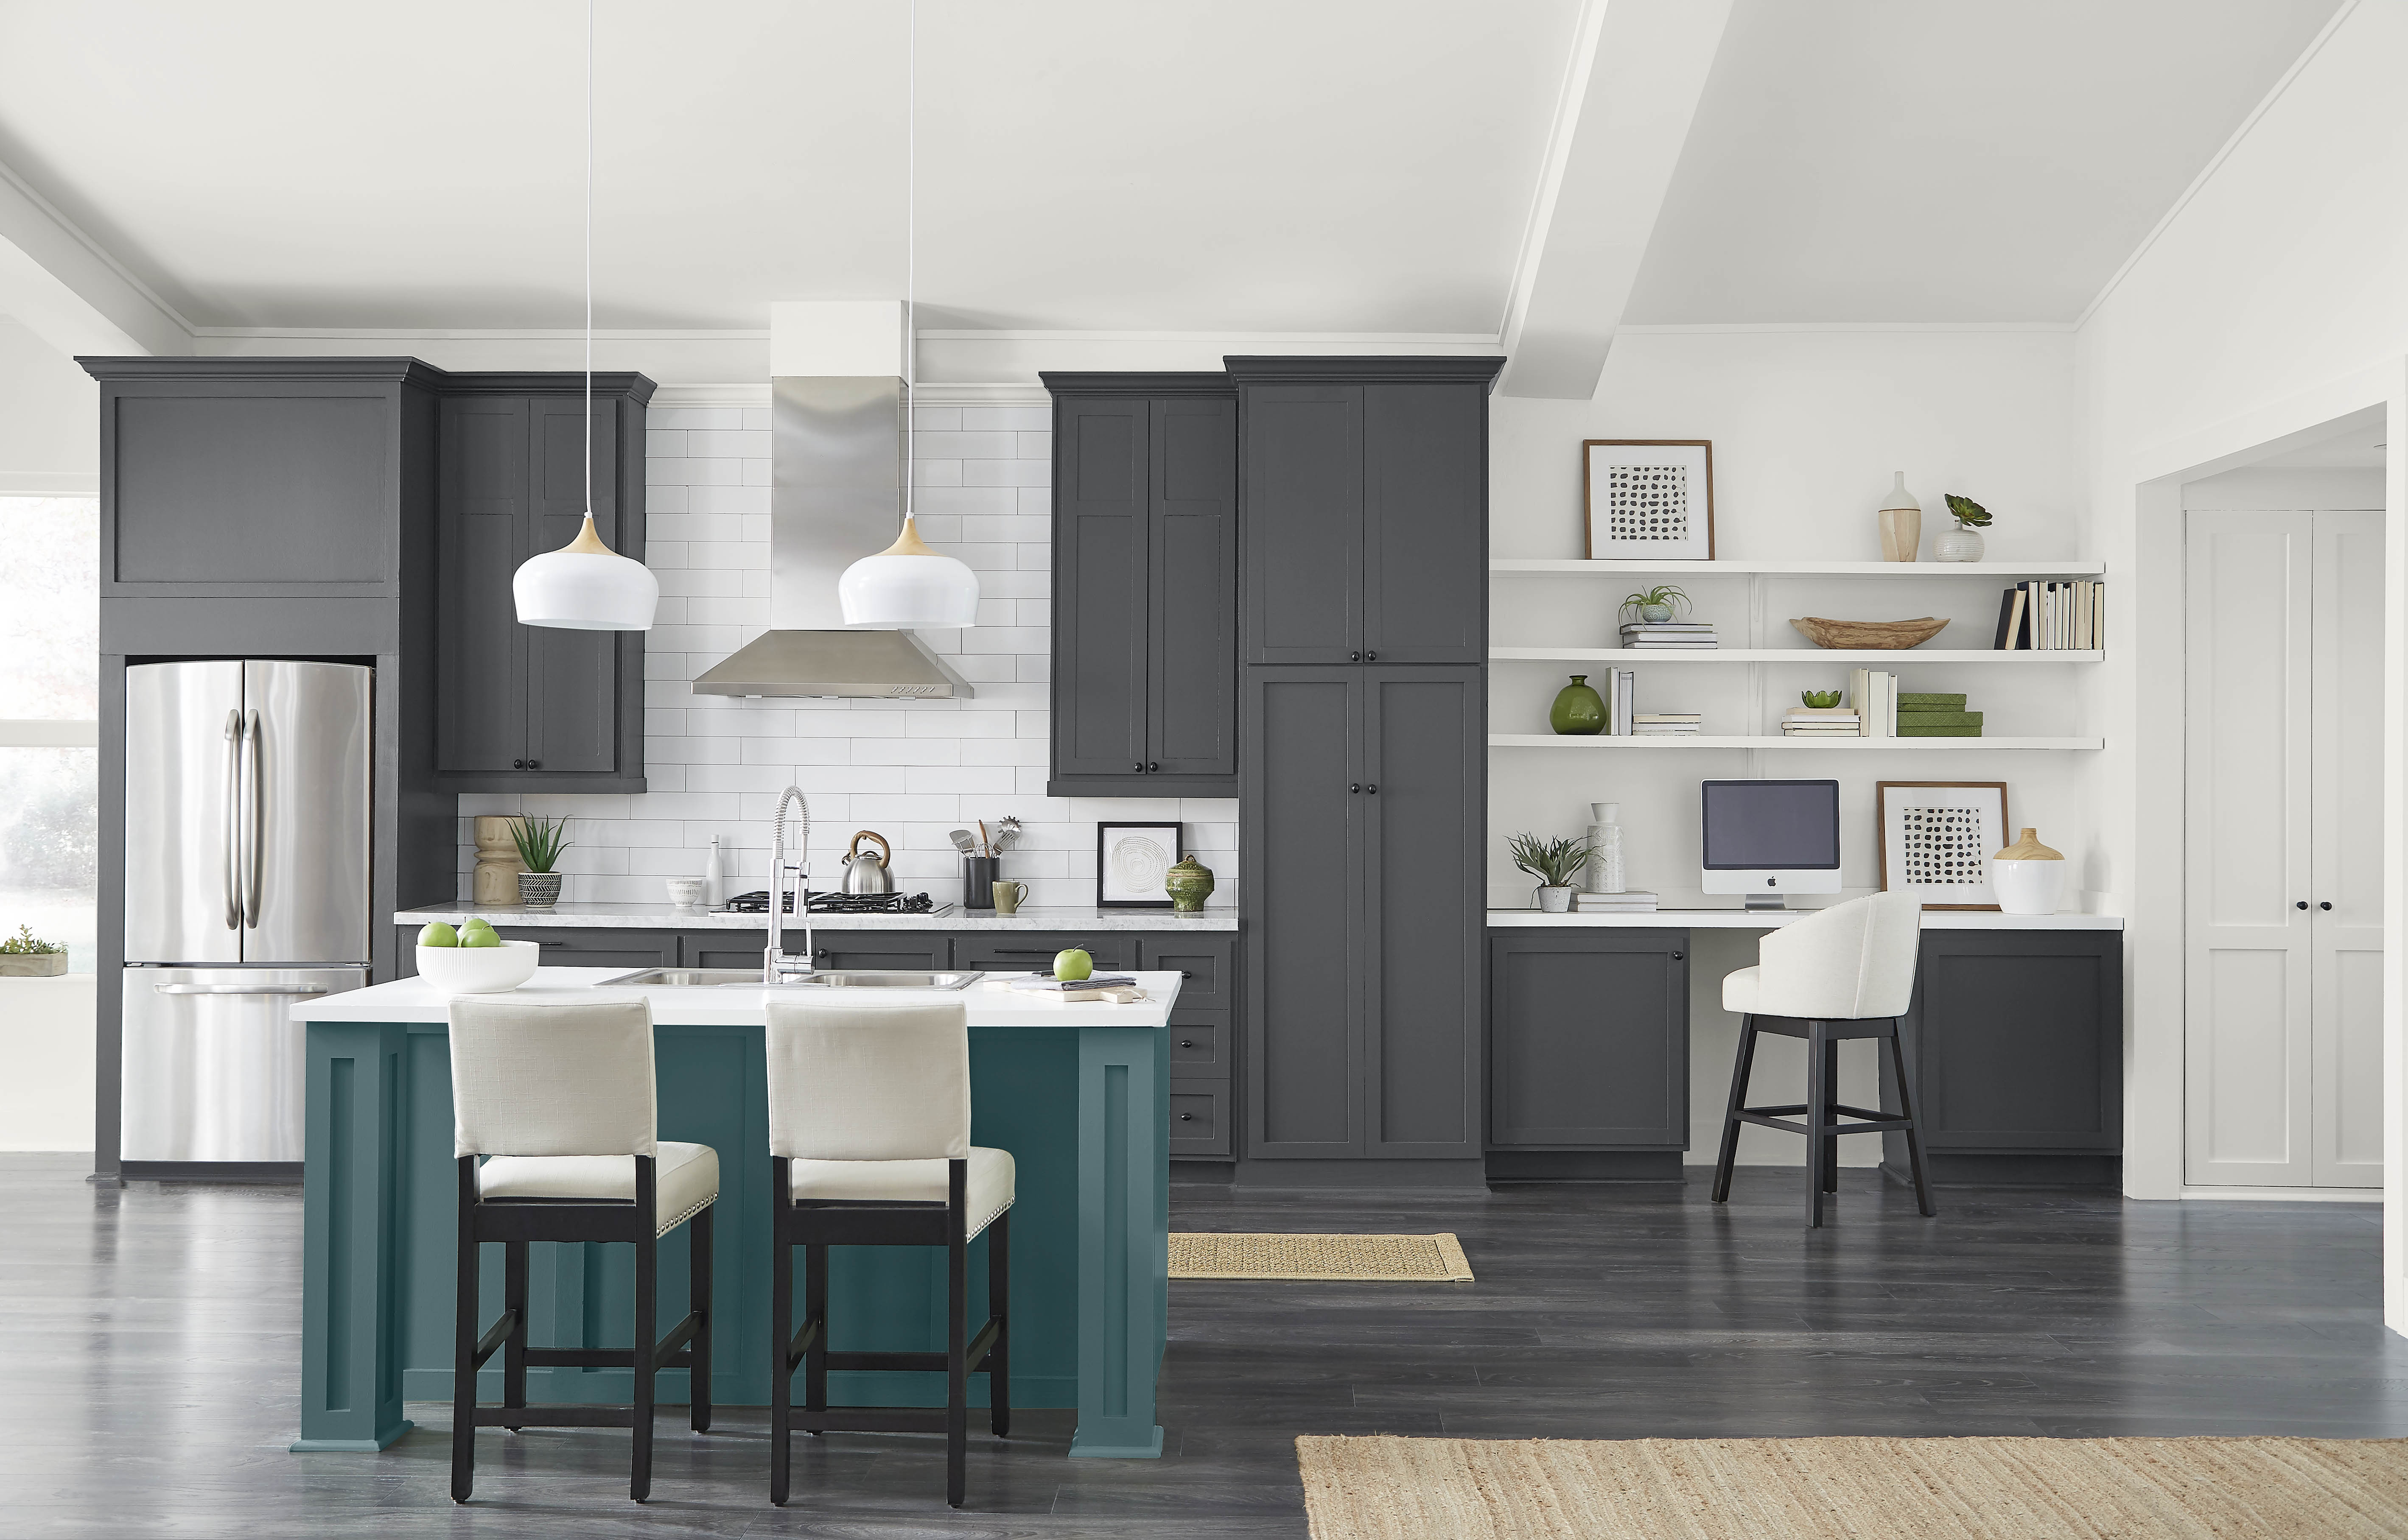 A classic kitchen with cabinets in the colour Cracked Pepper and a kitchen island in the colour Sophisticated Teal